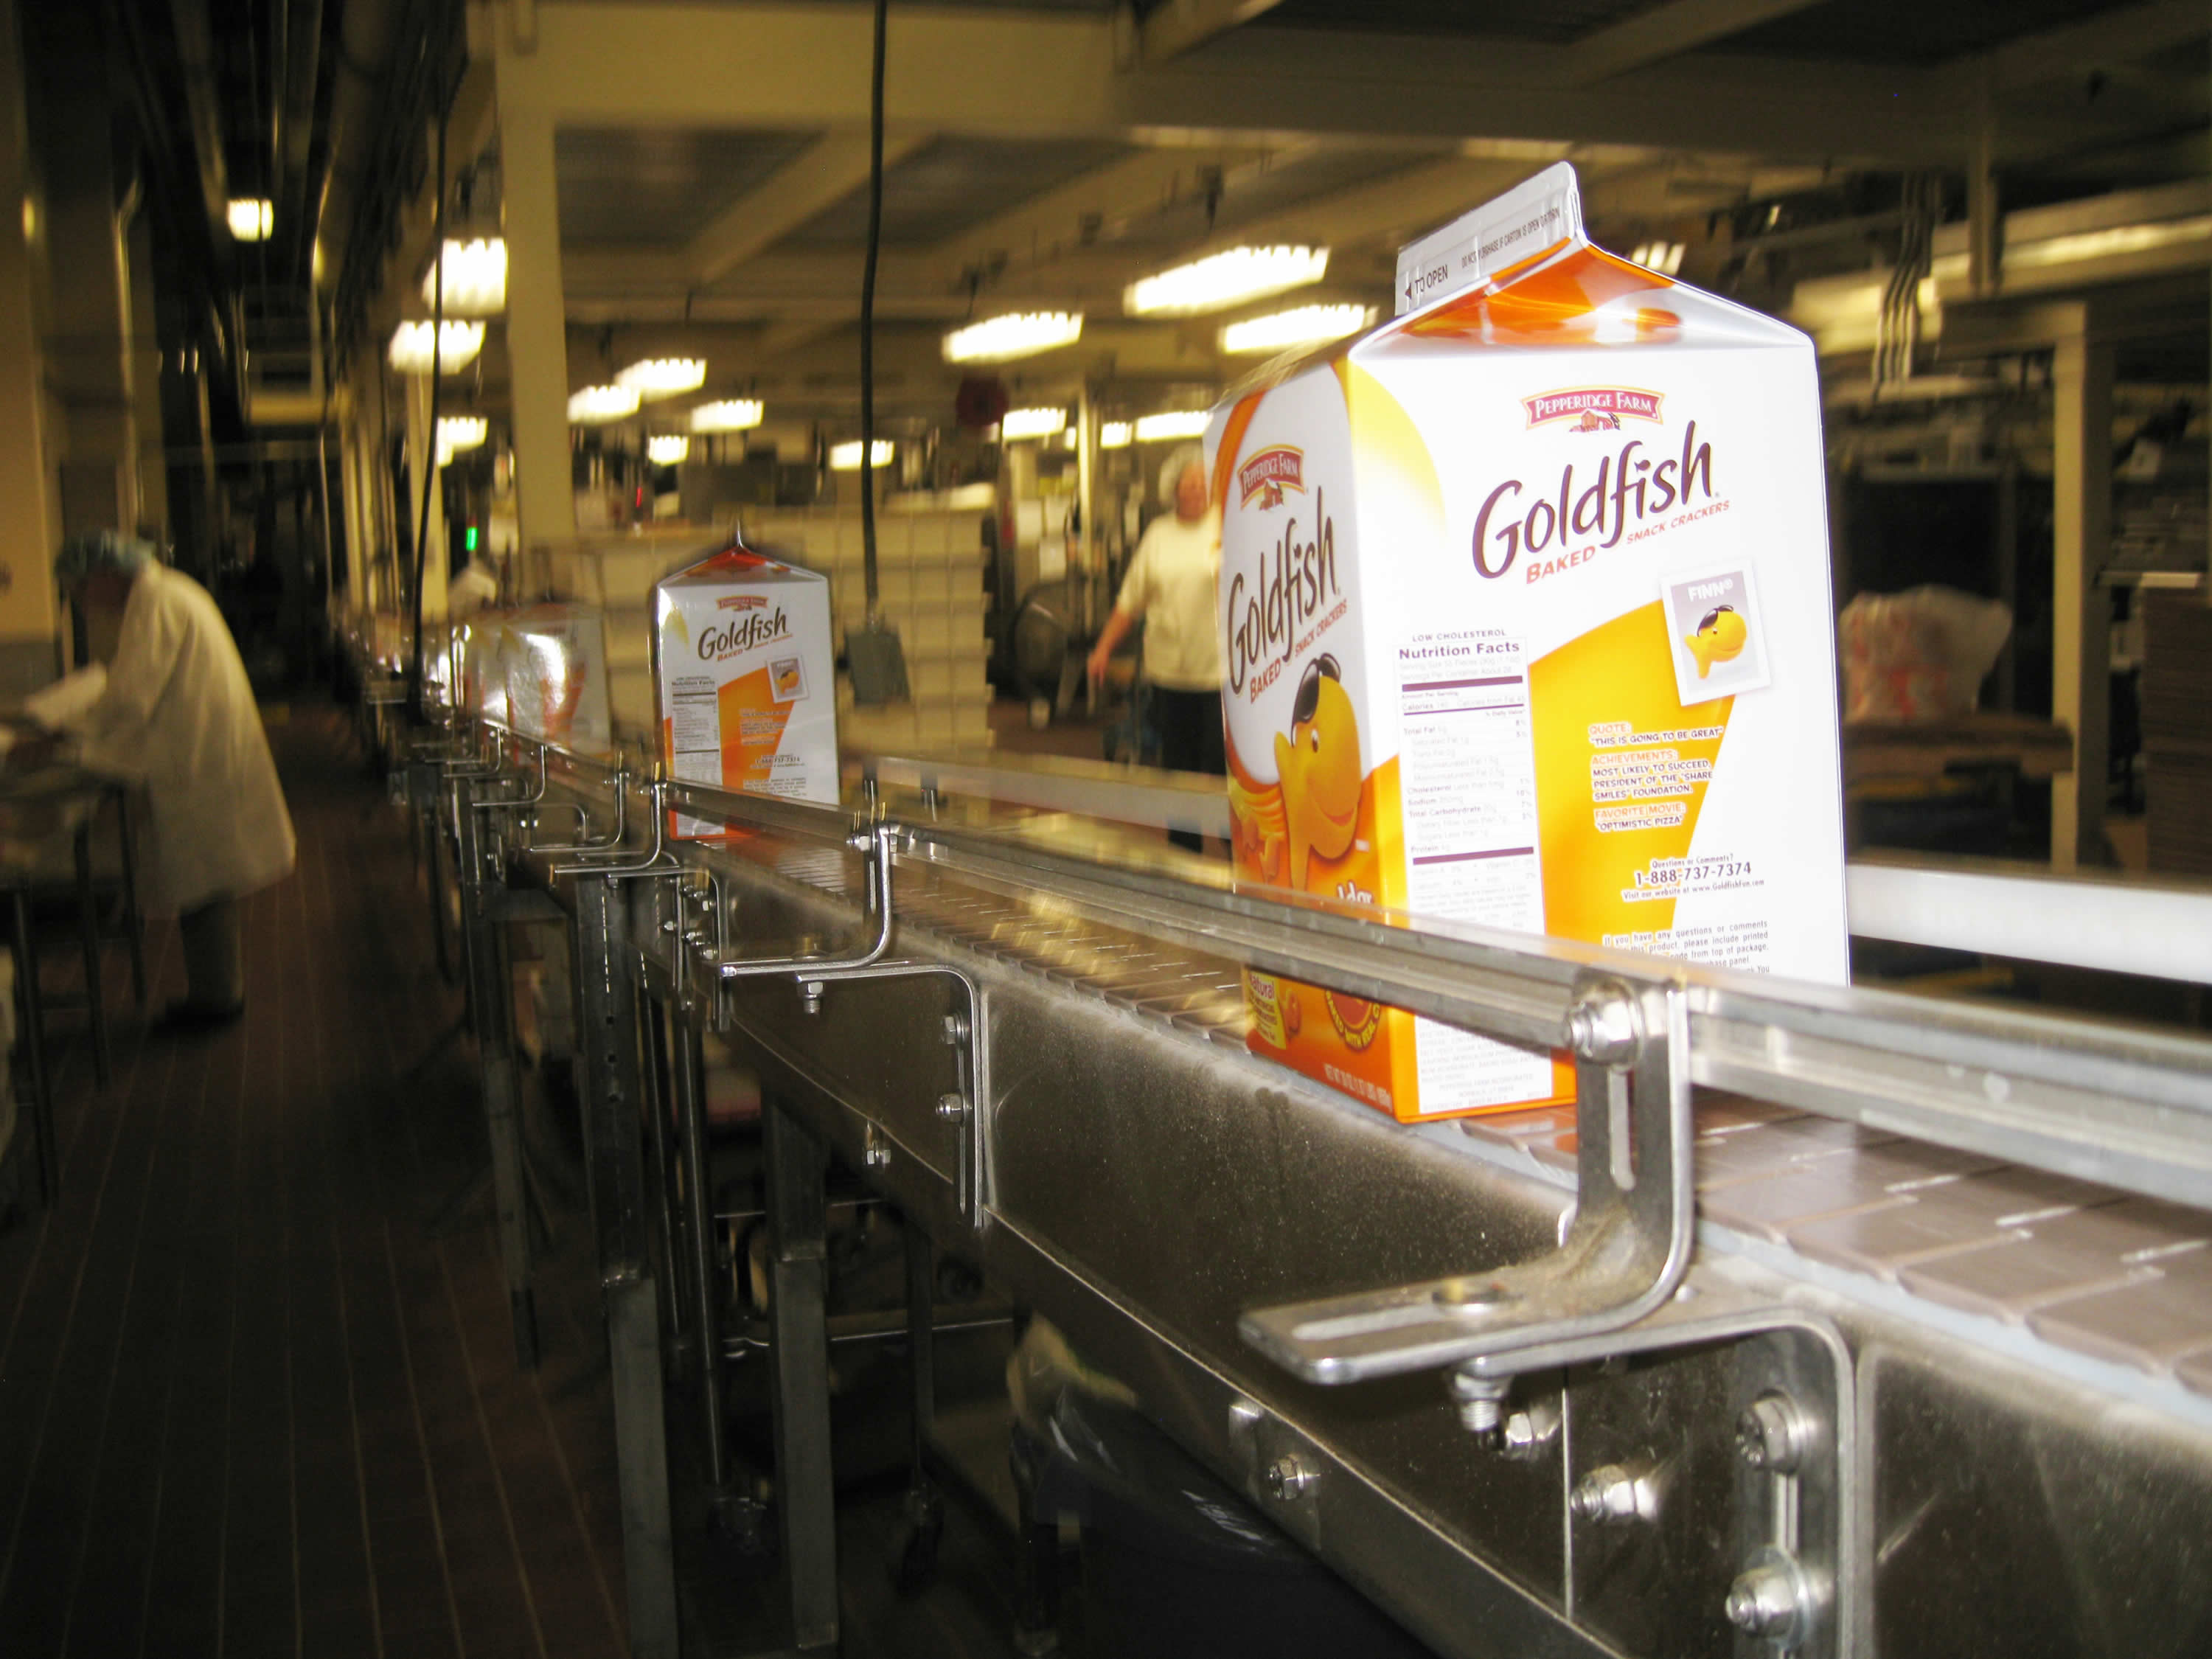 Large packages of Goldfish crackers on a production line